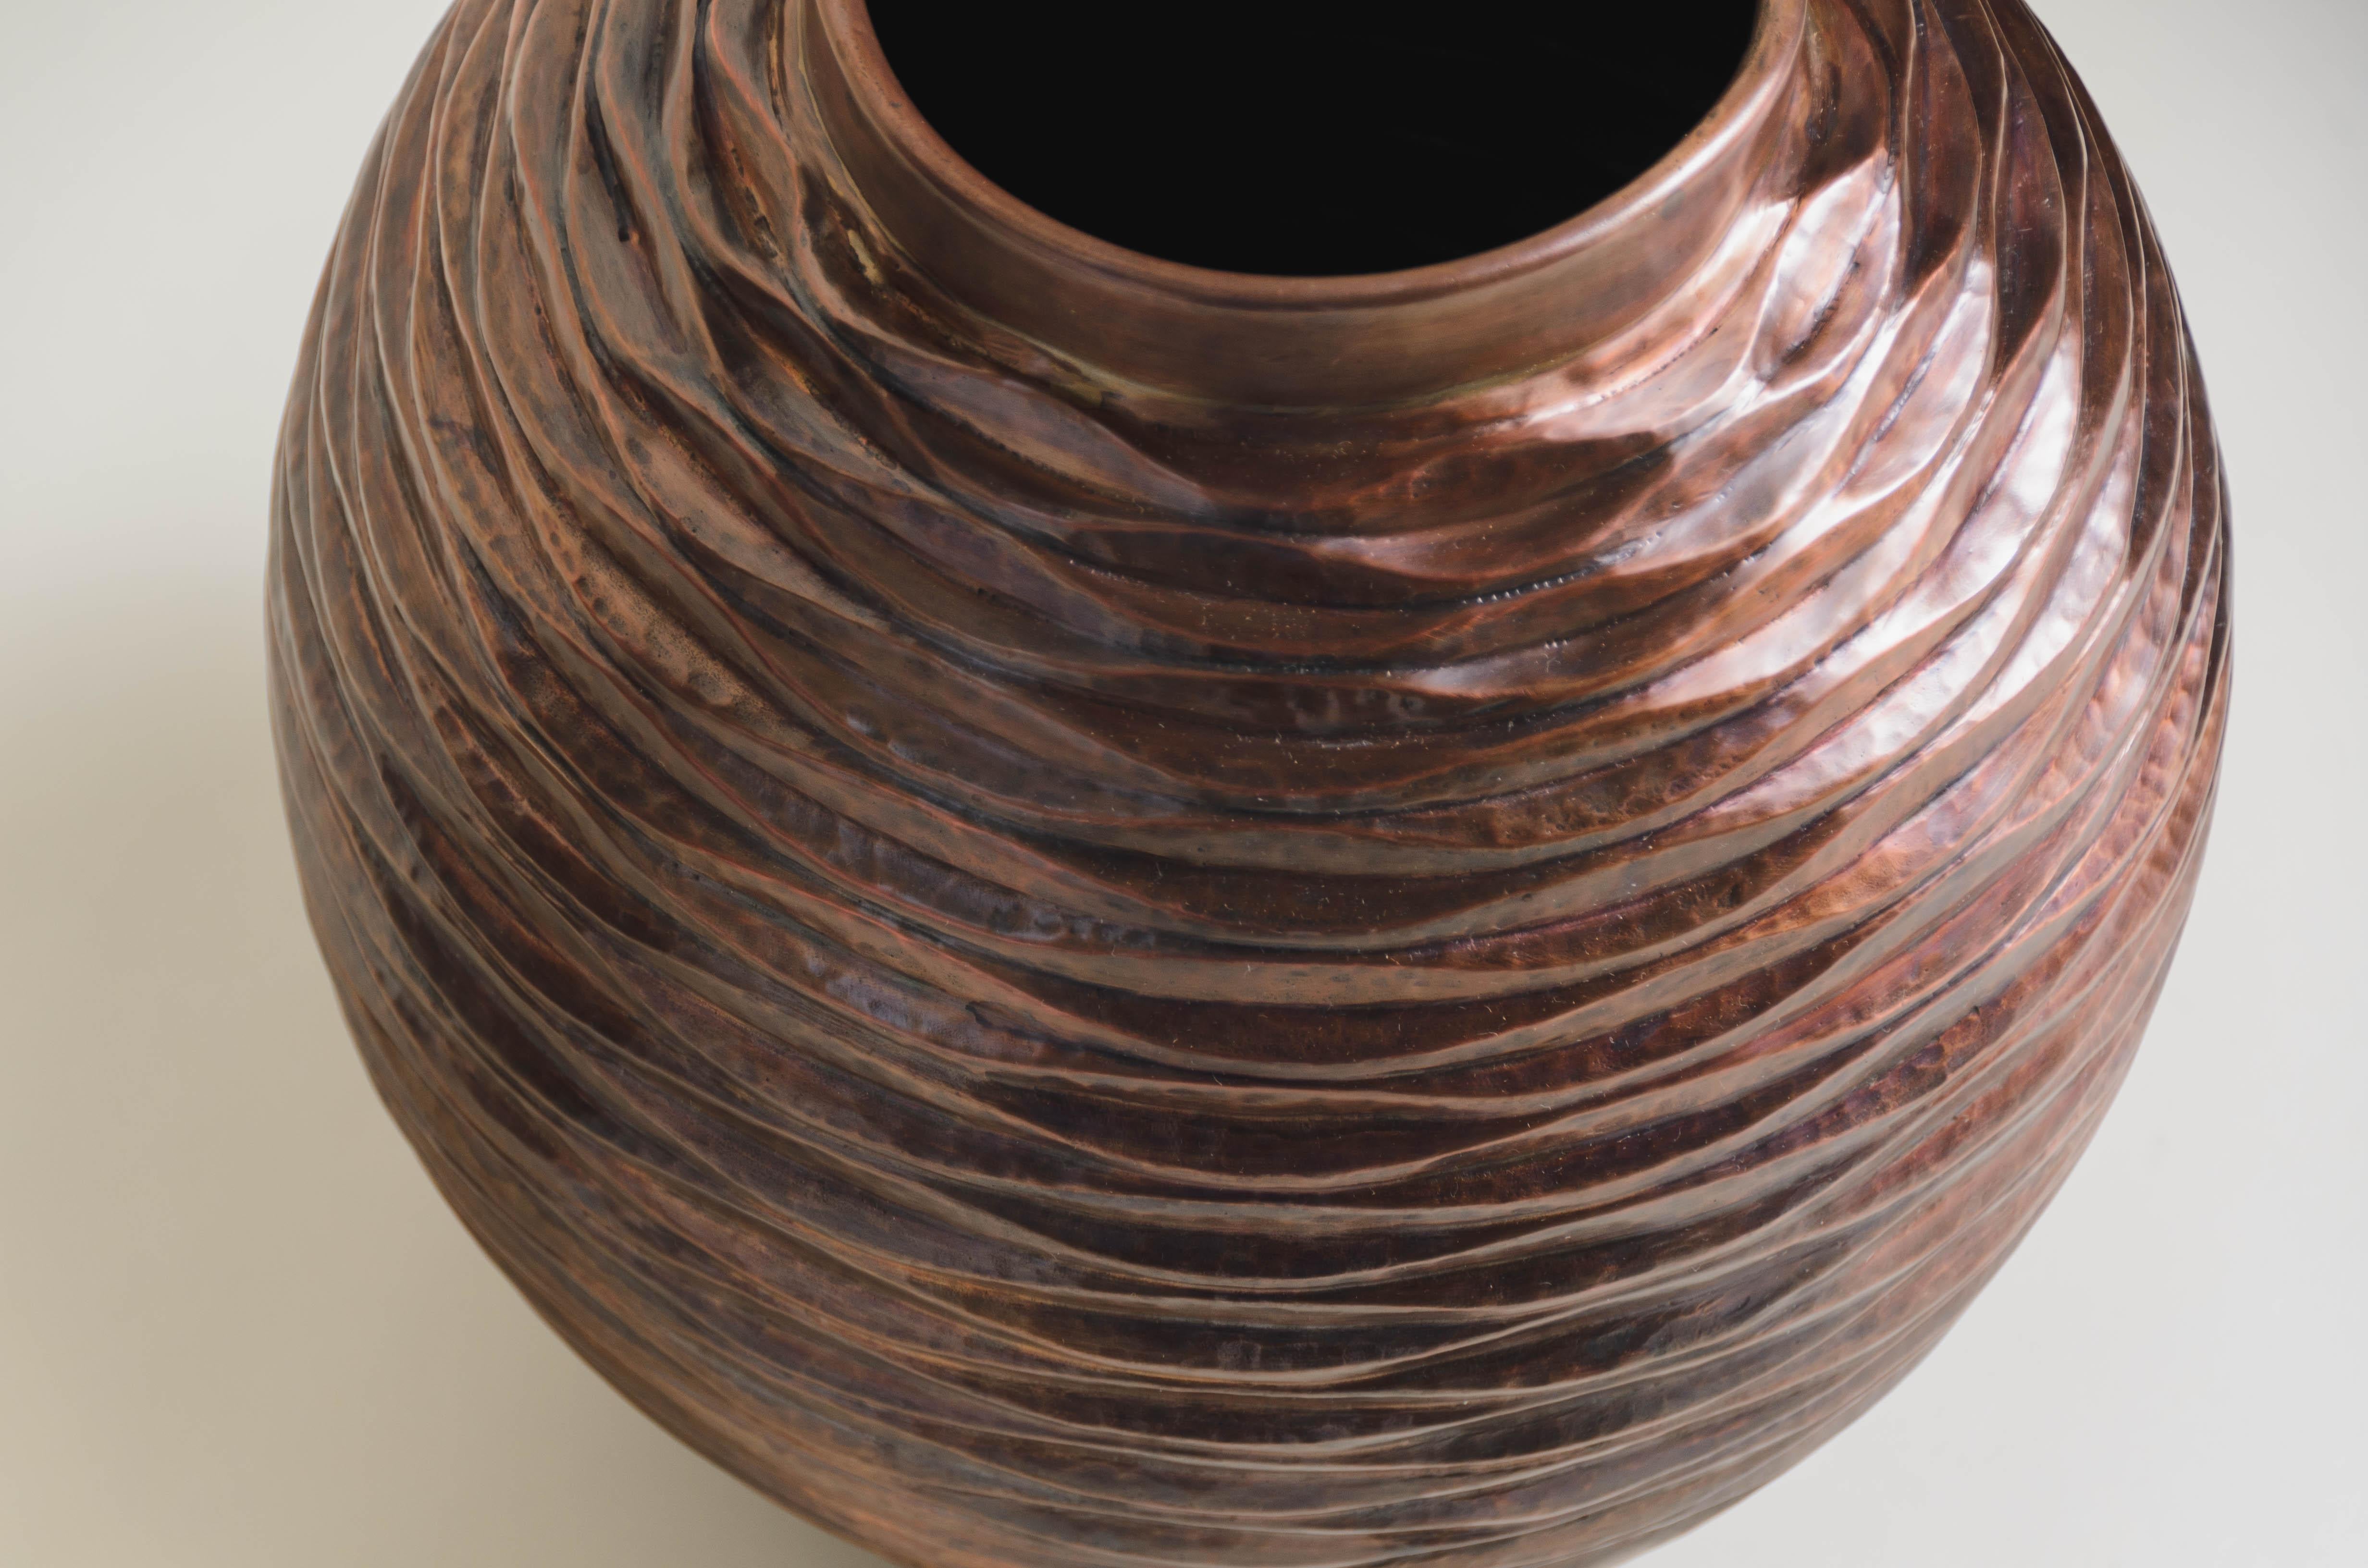 Repoussé Contemporary Repousse Ju Wen Jarlet in Antique Copper by Robert Kuo For Sale